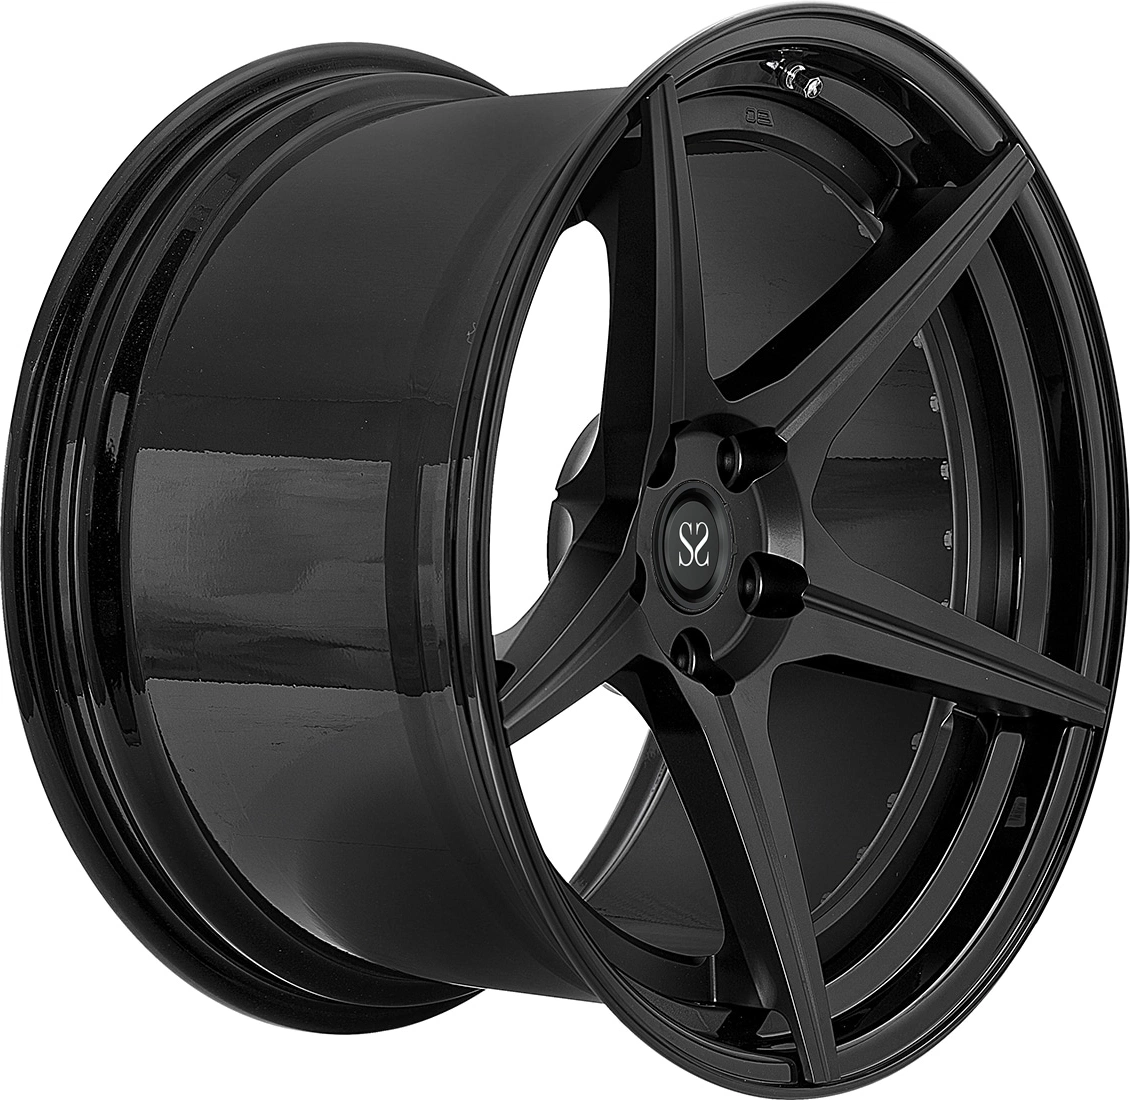 Customized 19 20 Inch Aluminum Alloy Forged Wheels Carbon Fiber 5X114.3 Replacement Wheel Rims